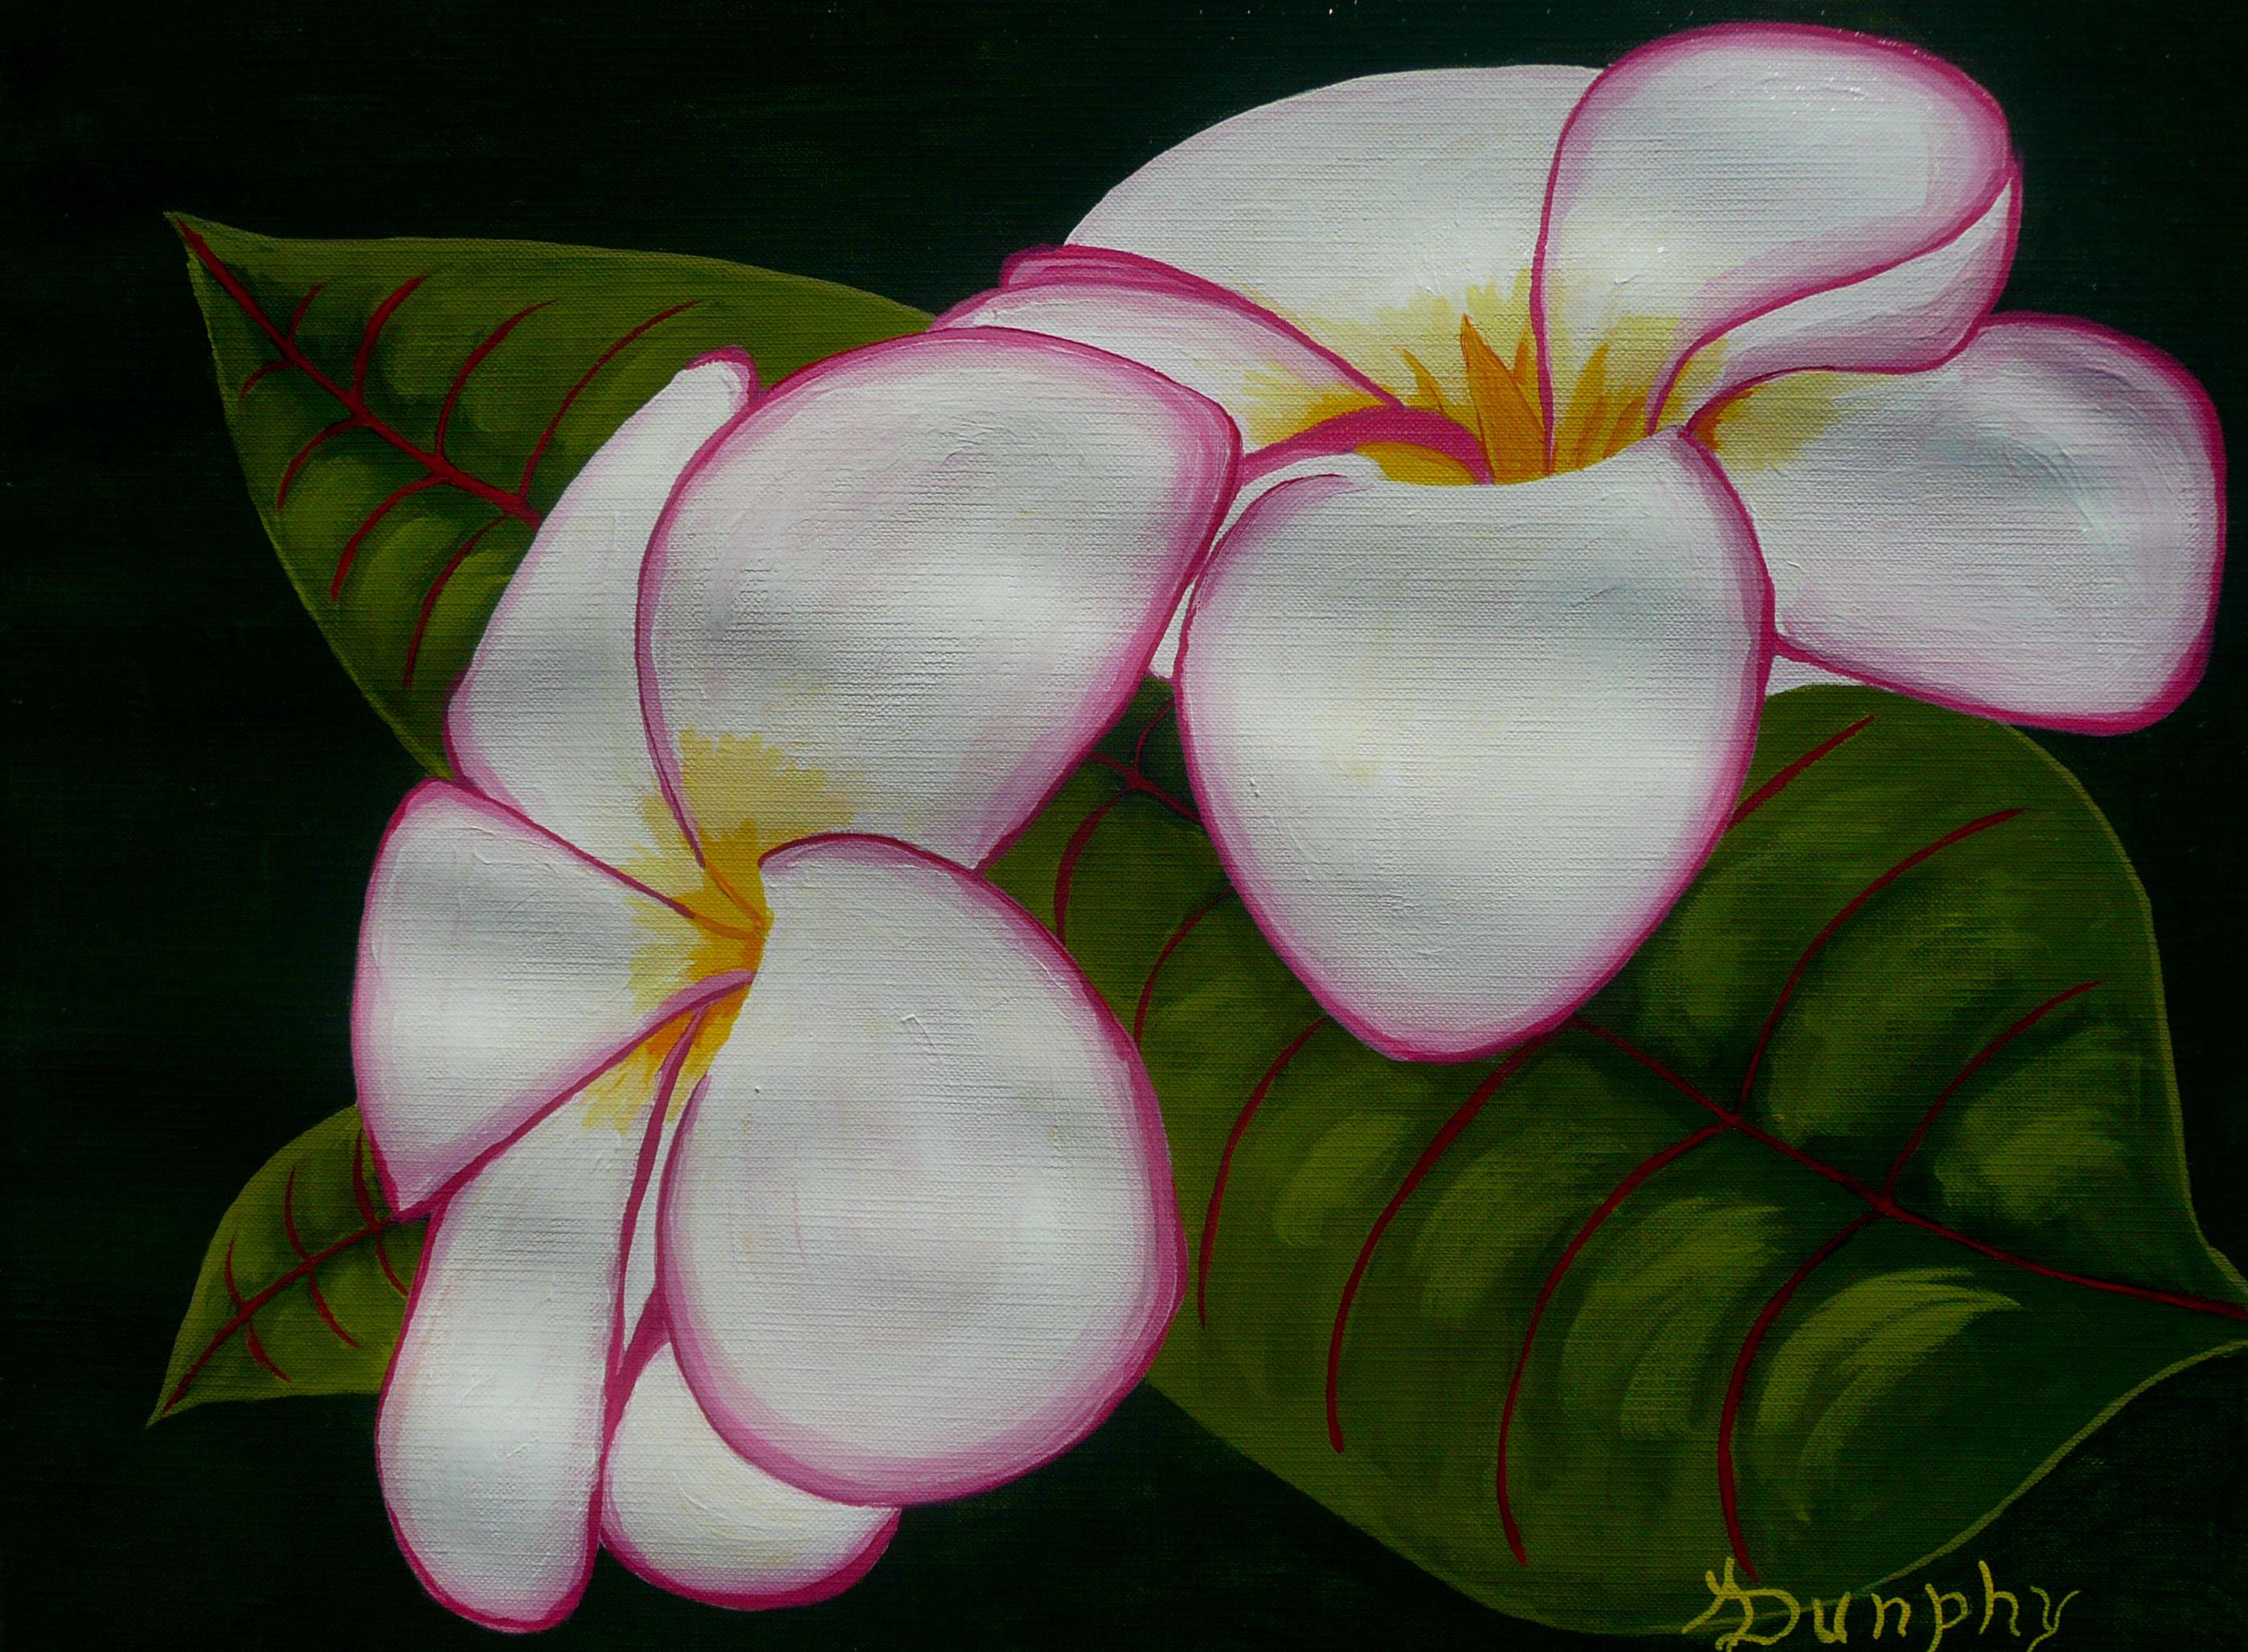 A fragrant plumeria found on the tropical islands. I took the reference shot for this painting on a recent trip to Oahu, Hawaii.  This painting has been created using professional grade acrylics on 118lb archival quality canvas paper. The size is